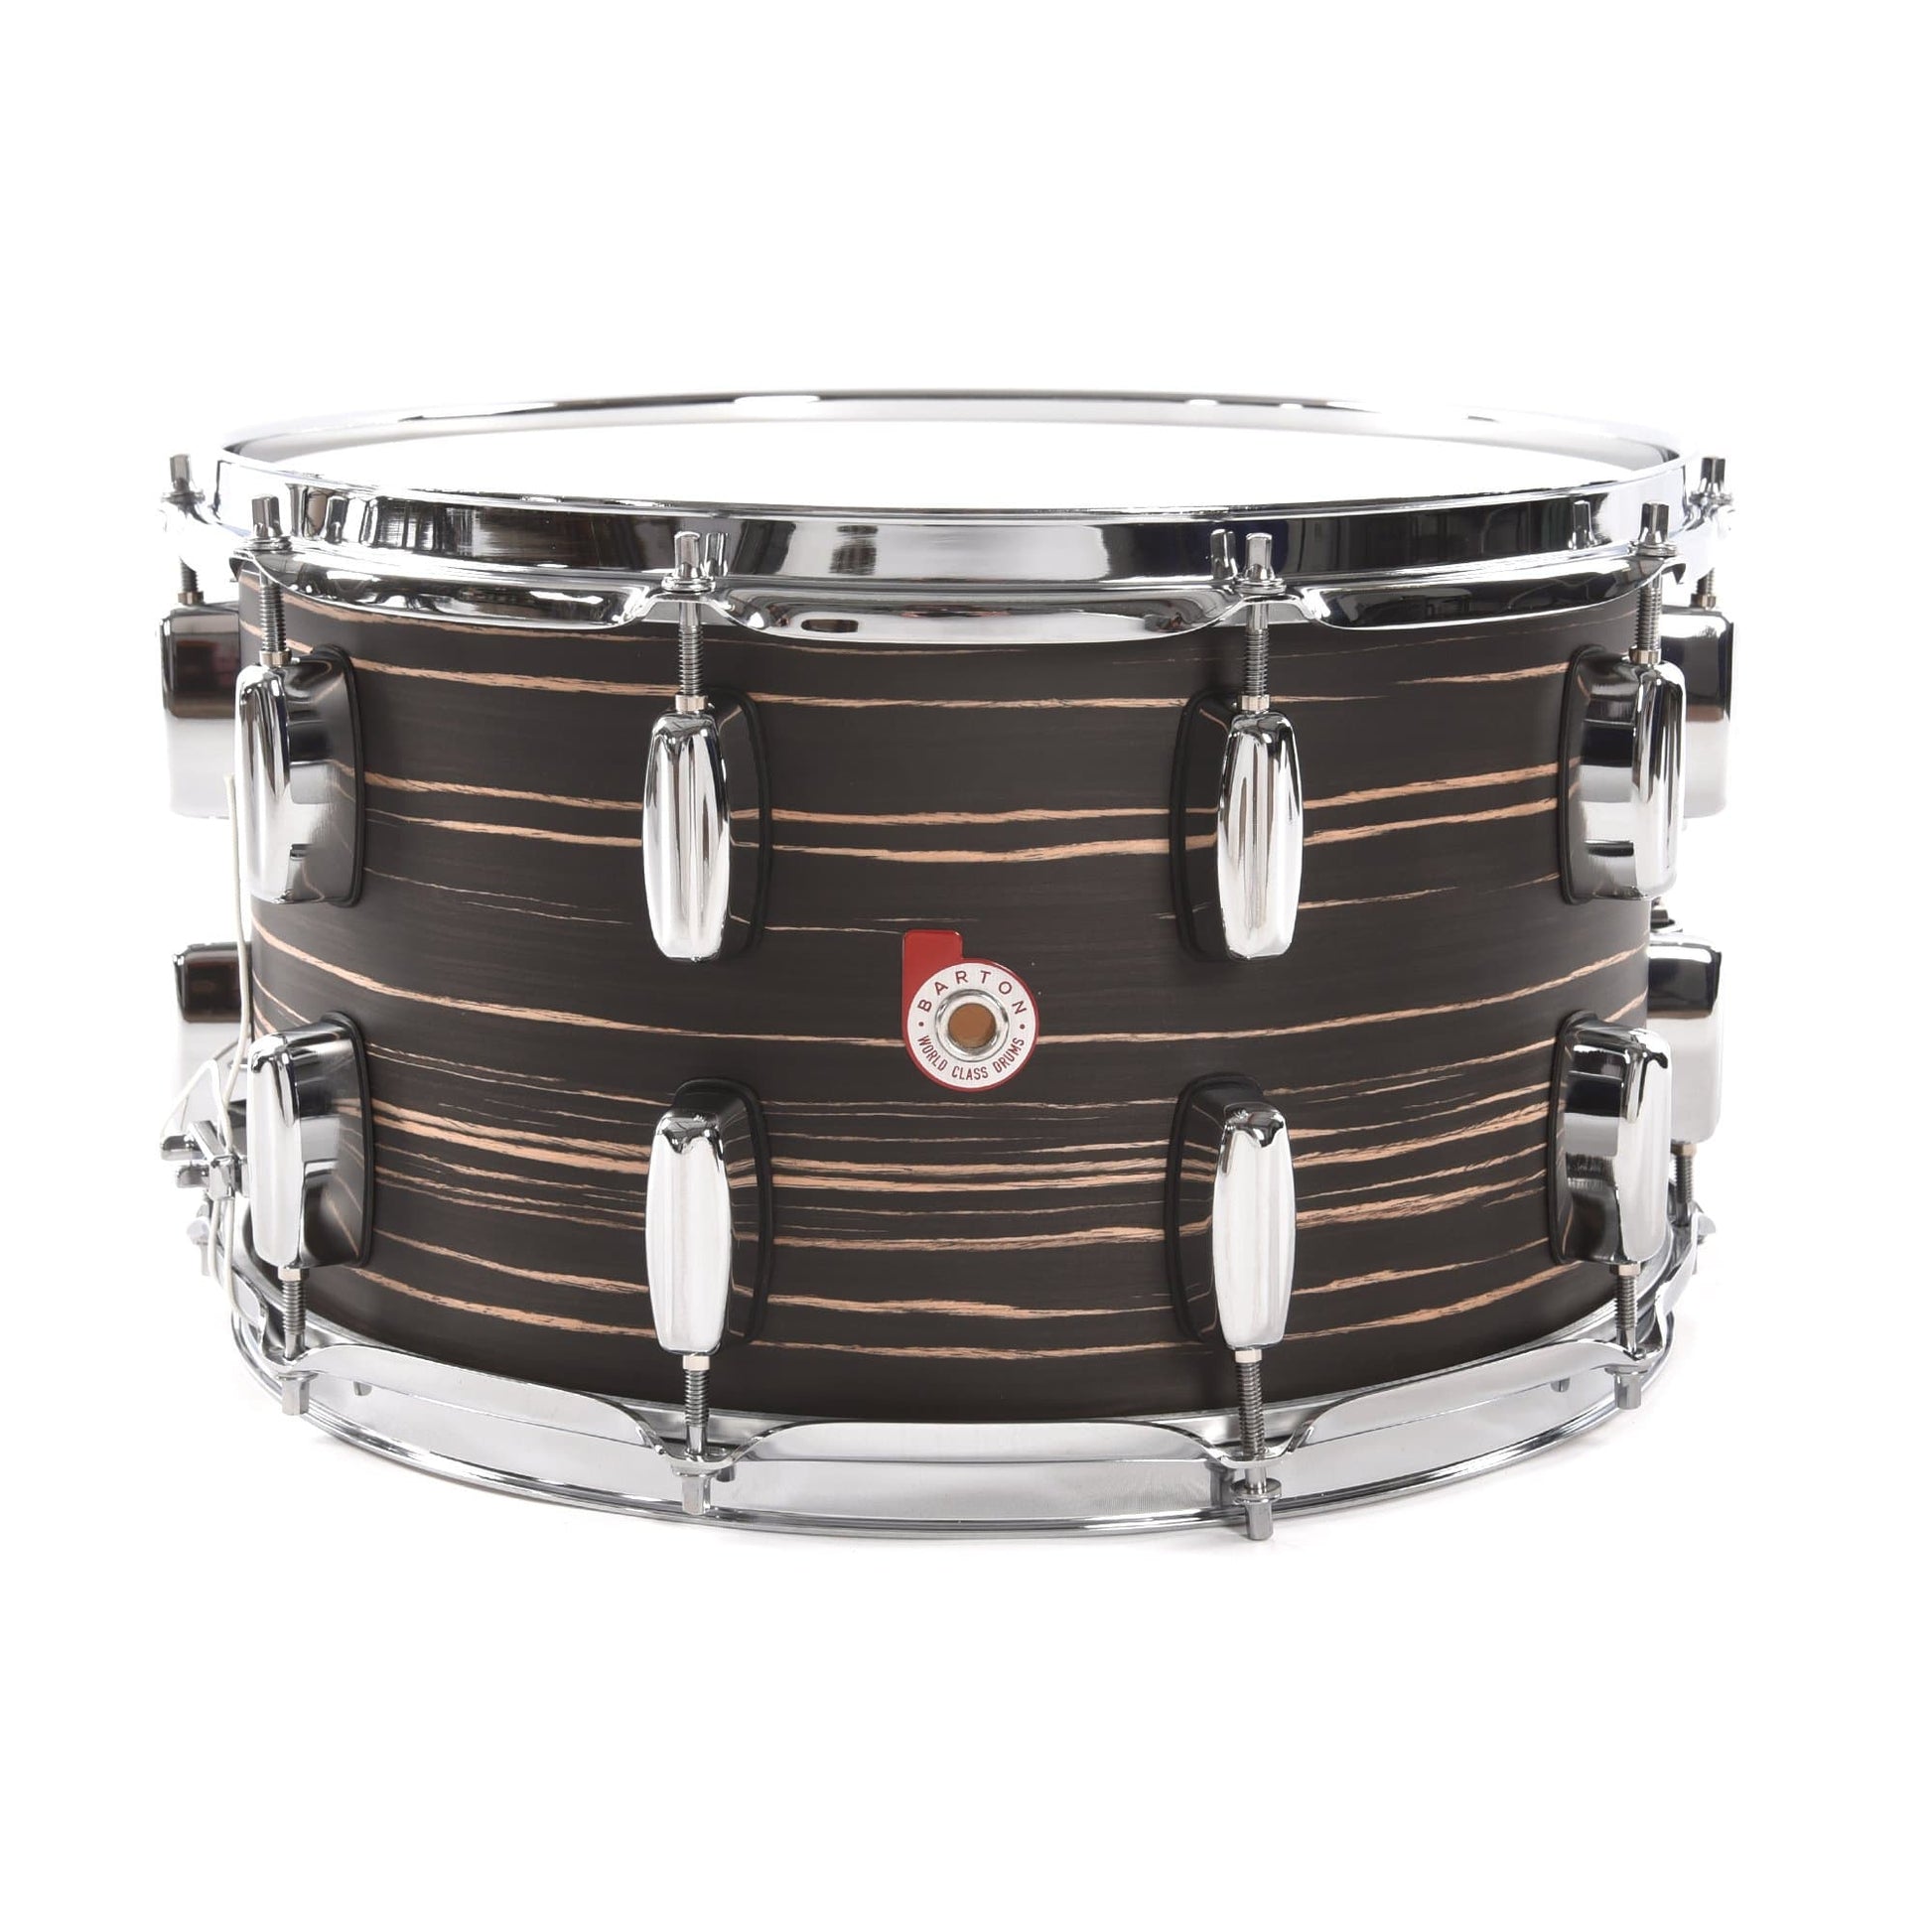 Barton Drum Co. 8x14 Beech Snare Drum Ebony Drums and Percussion / Acoustic Drums / Snare